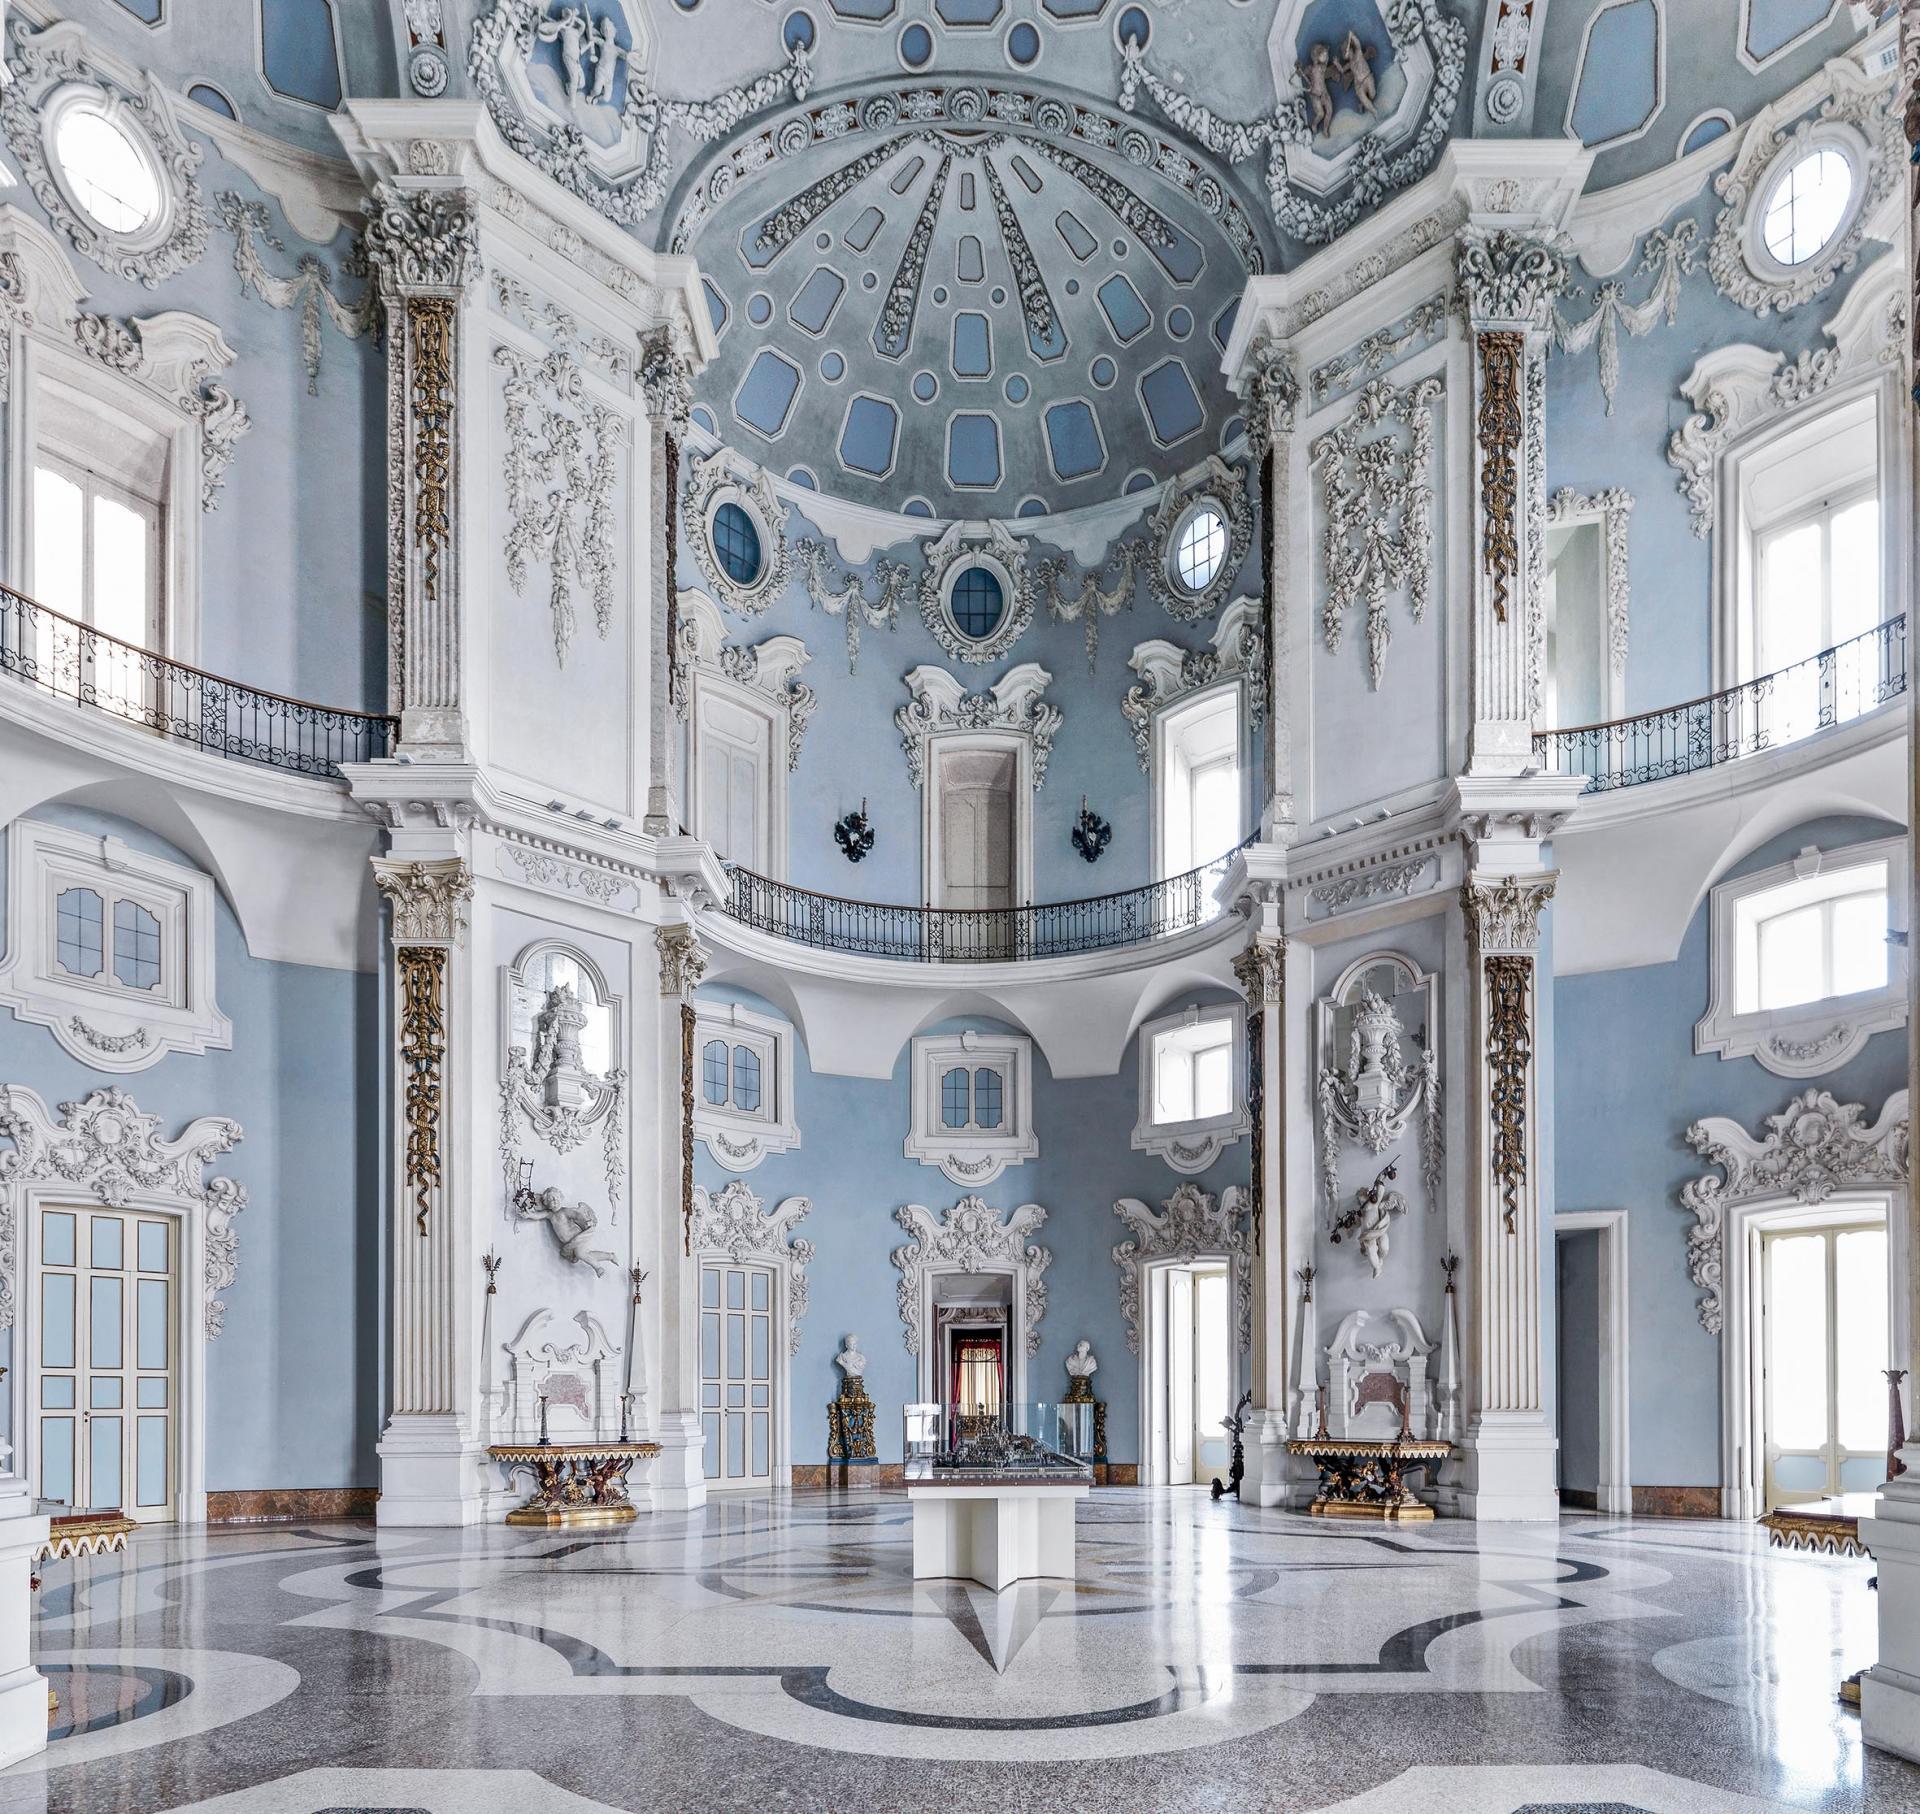 Palazzo Borromeo II, Isola Bella, 2018
C print
120 x 150 cm
edition of 5 
Signed and numbered on the verso label

Also available
120 x 150 cm (47.5 × 59 inches) Edition of 5  
180 x 225 cm (71 x 88.75 inches) Edition of 5

The photographer is based